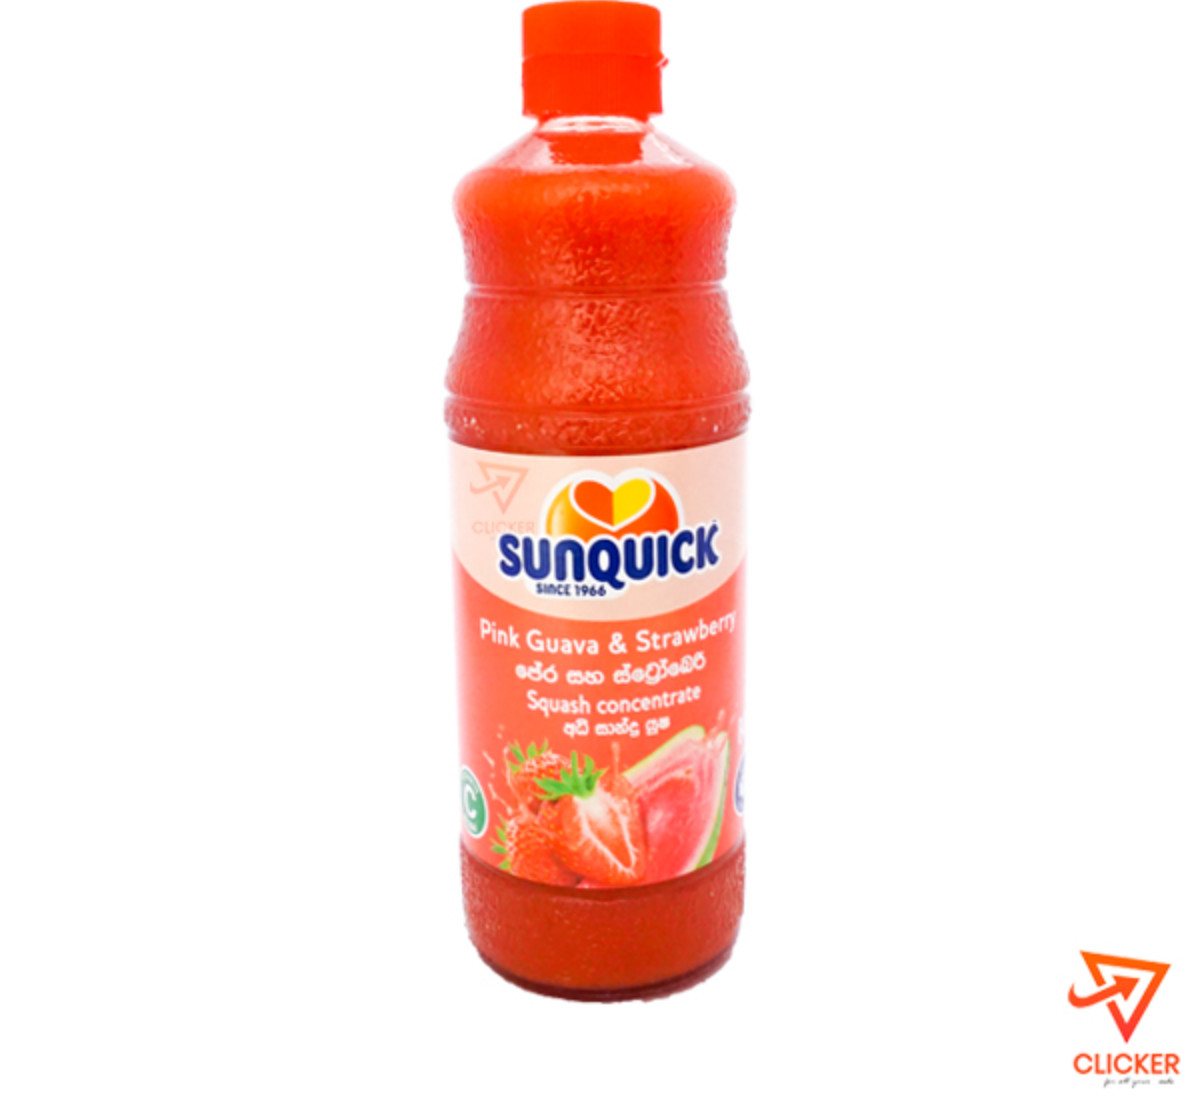 Clicker product 700ml SUNQUICK Pink Guava and Strawberry 1153